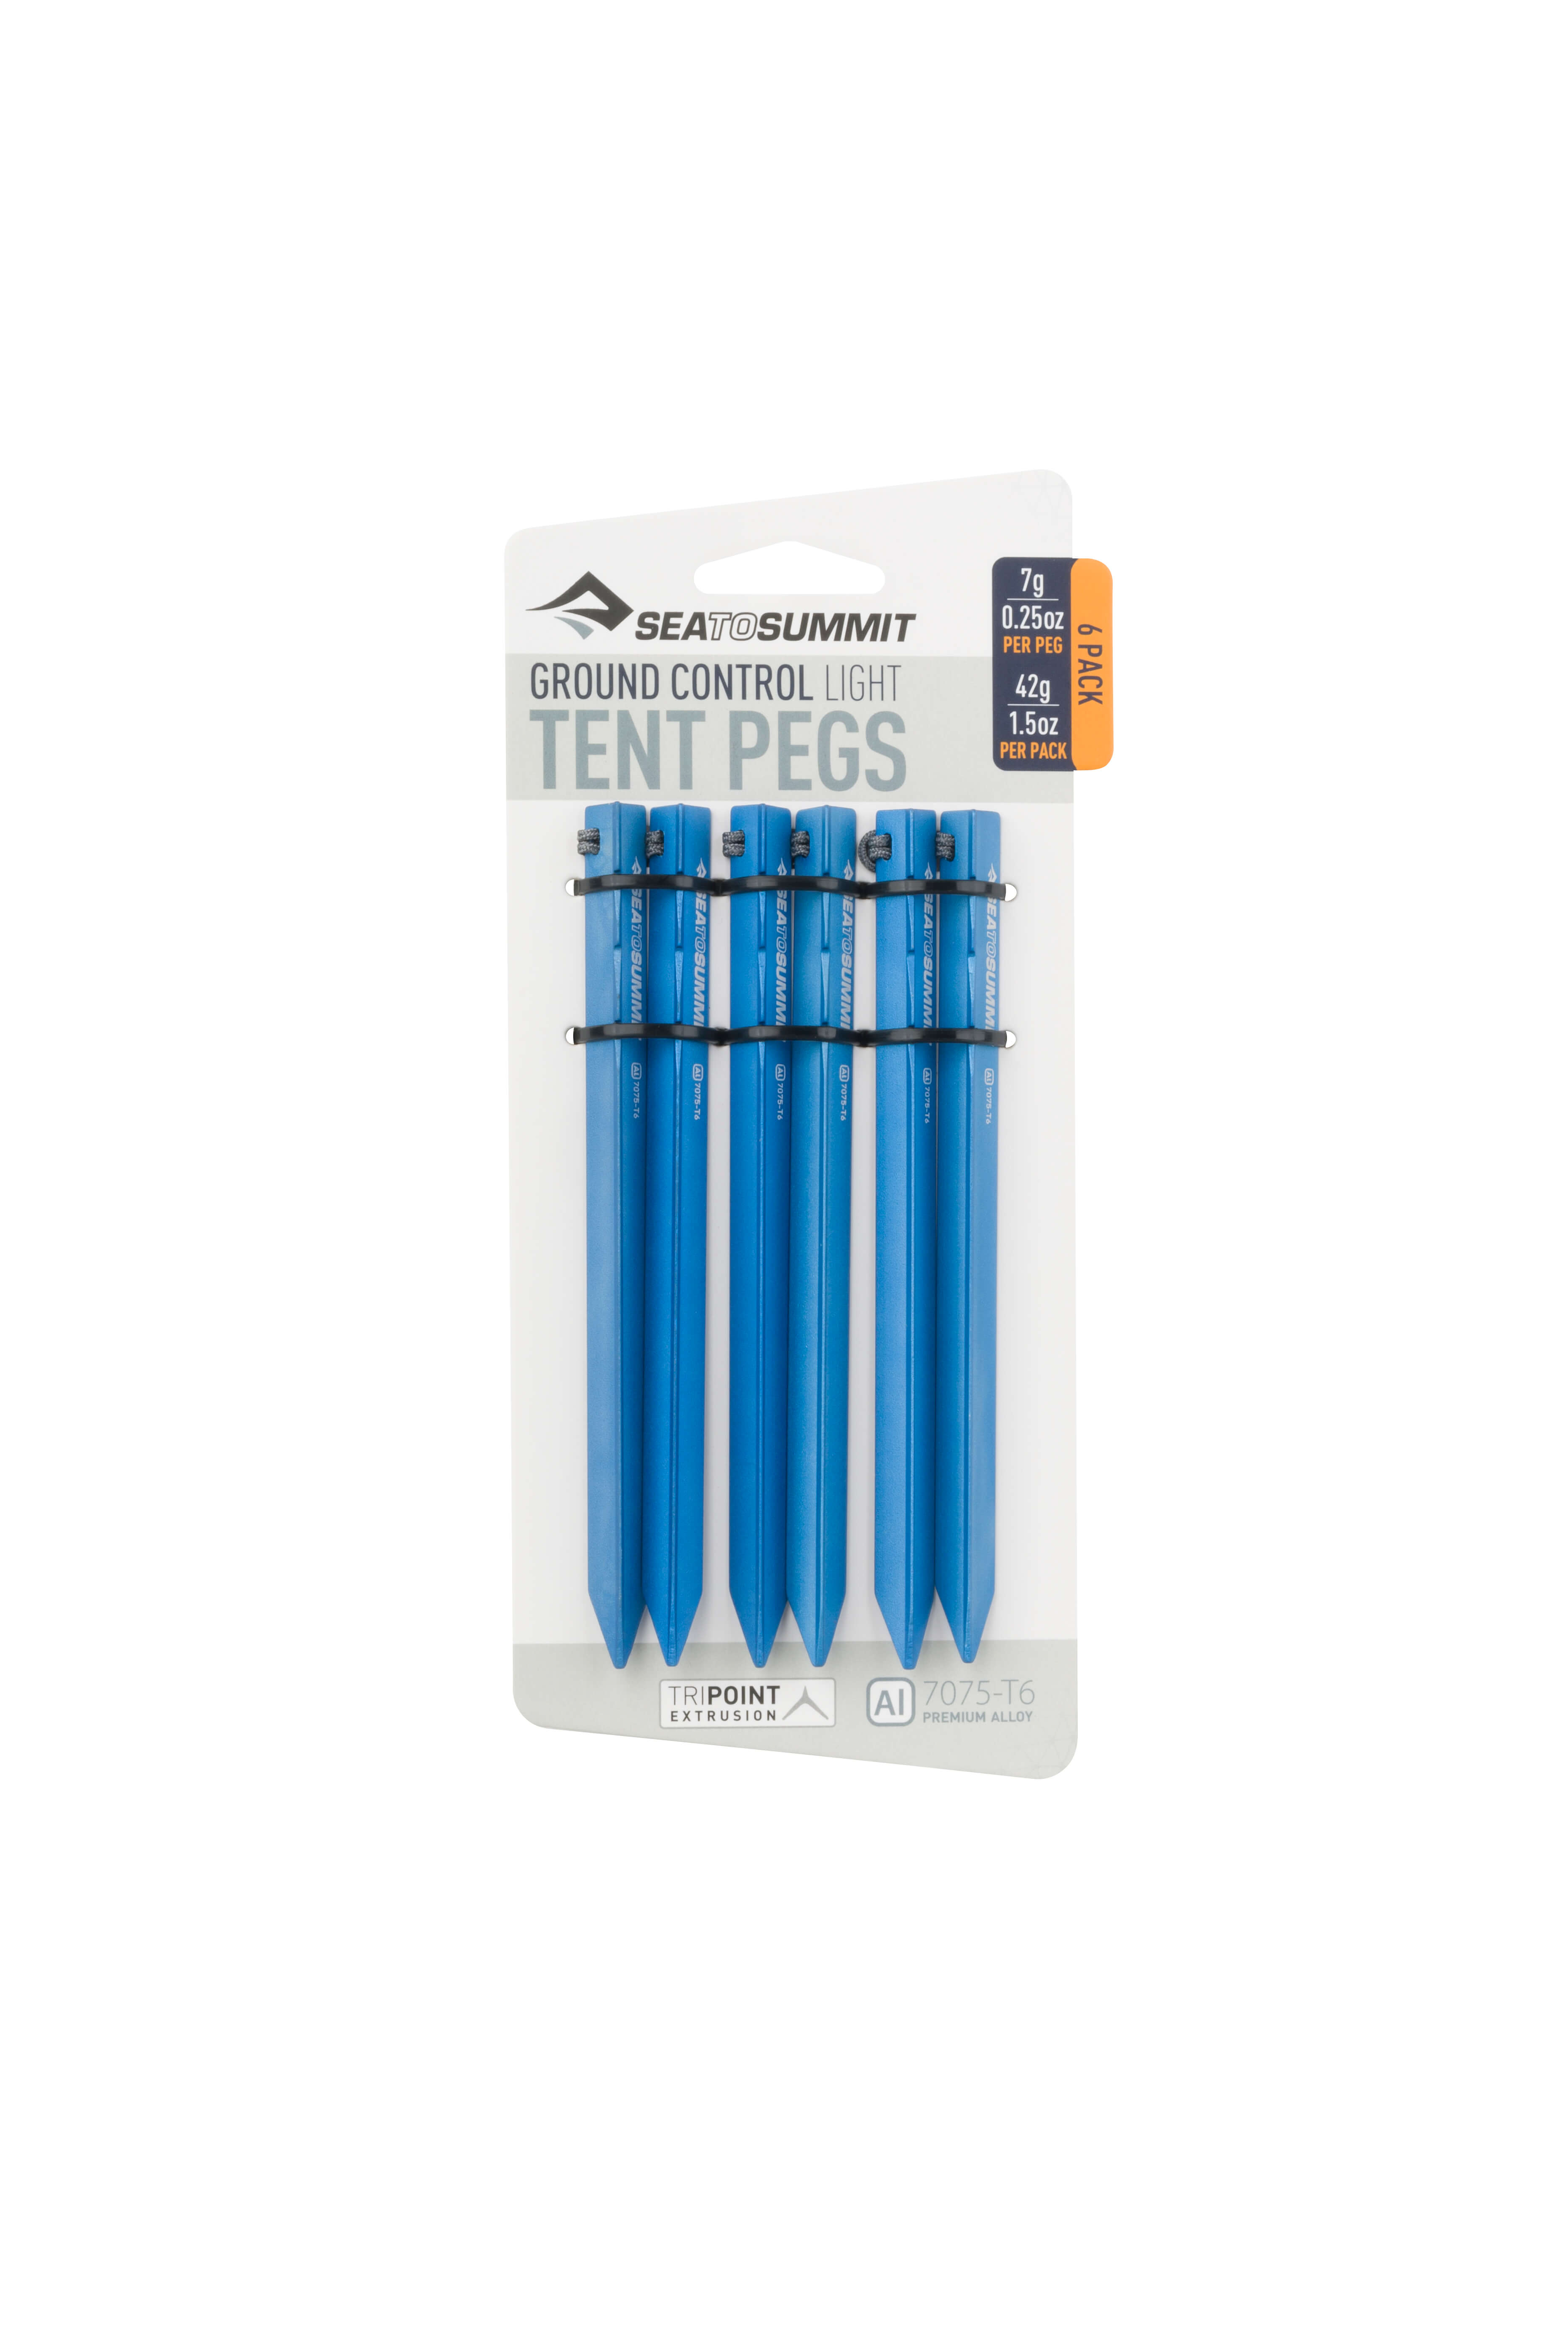 Ground Control Light Tent Pegs (6 Pack)